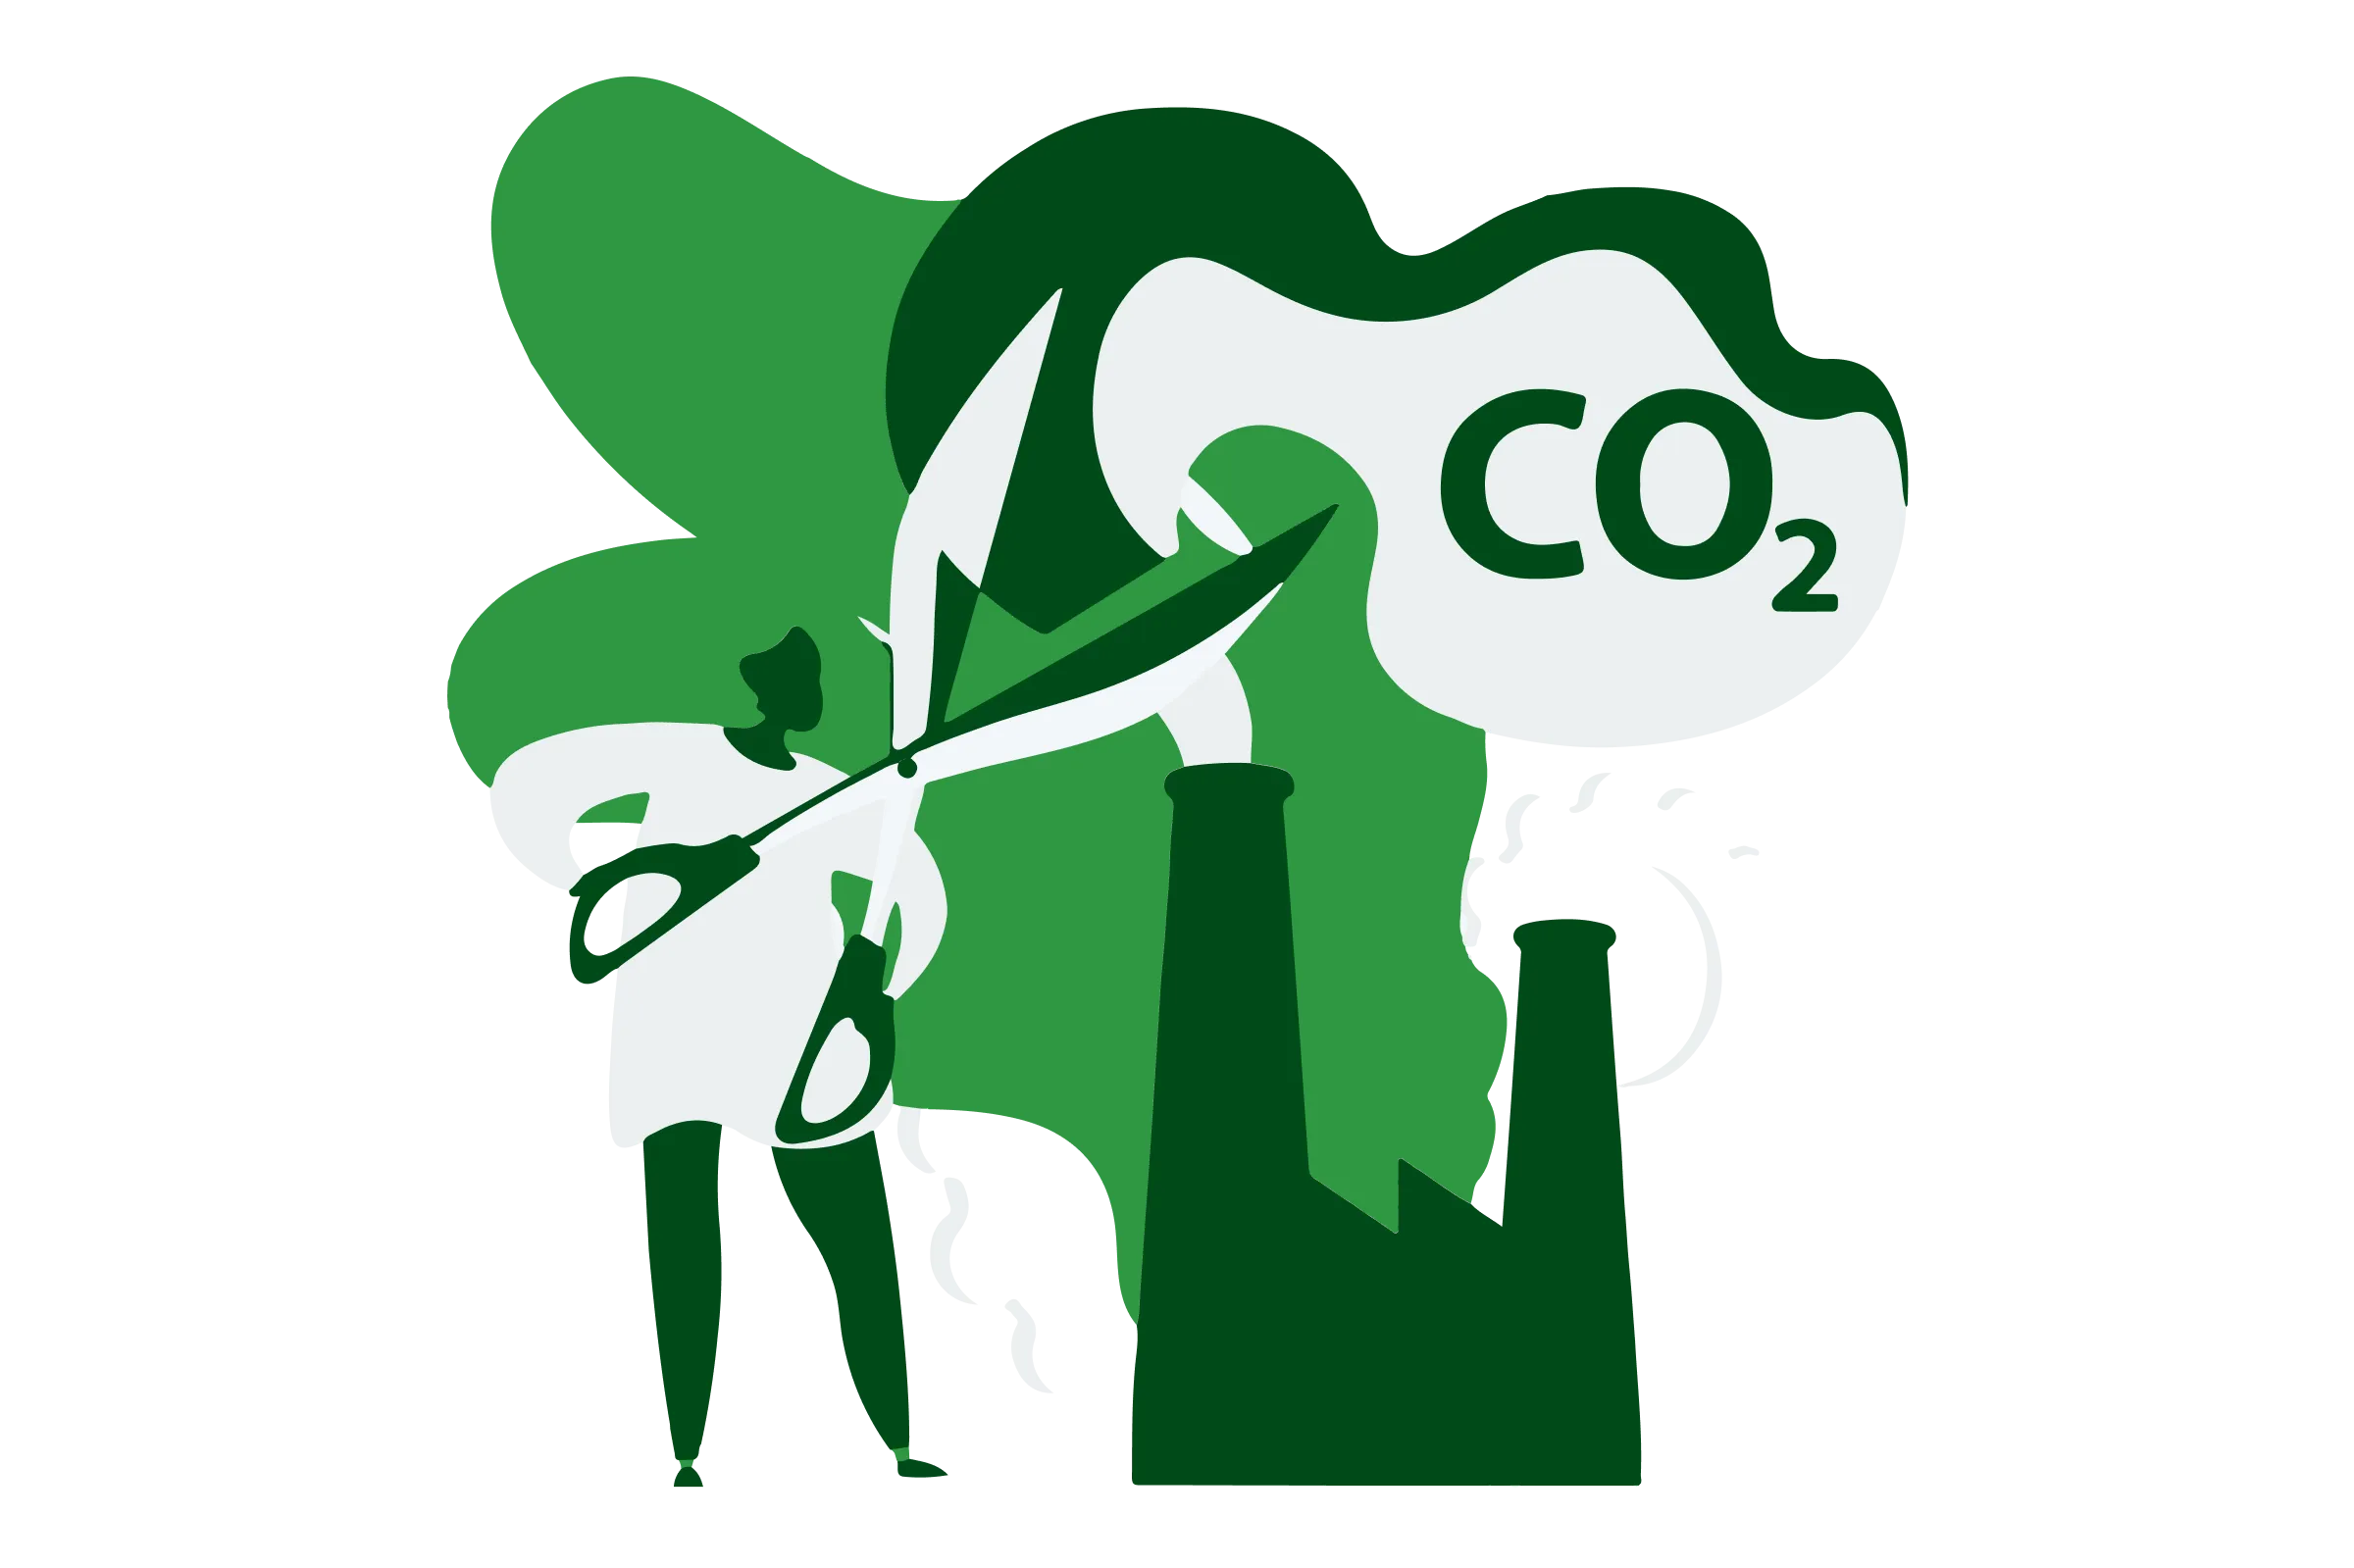 Illustration depicting a man cutting down emissions of CO2 from a factory with a large pair of scissors.